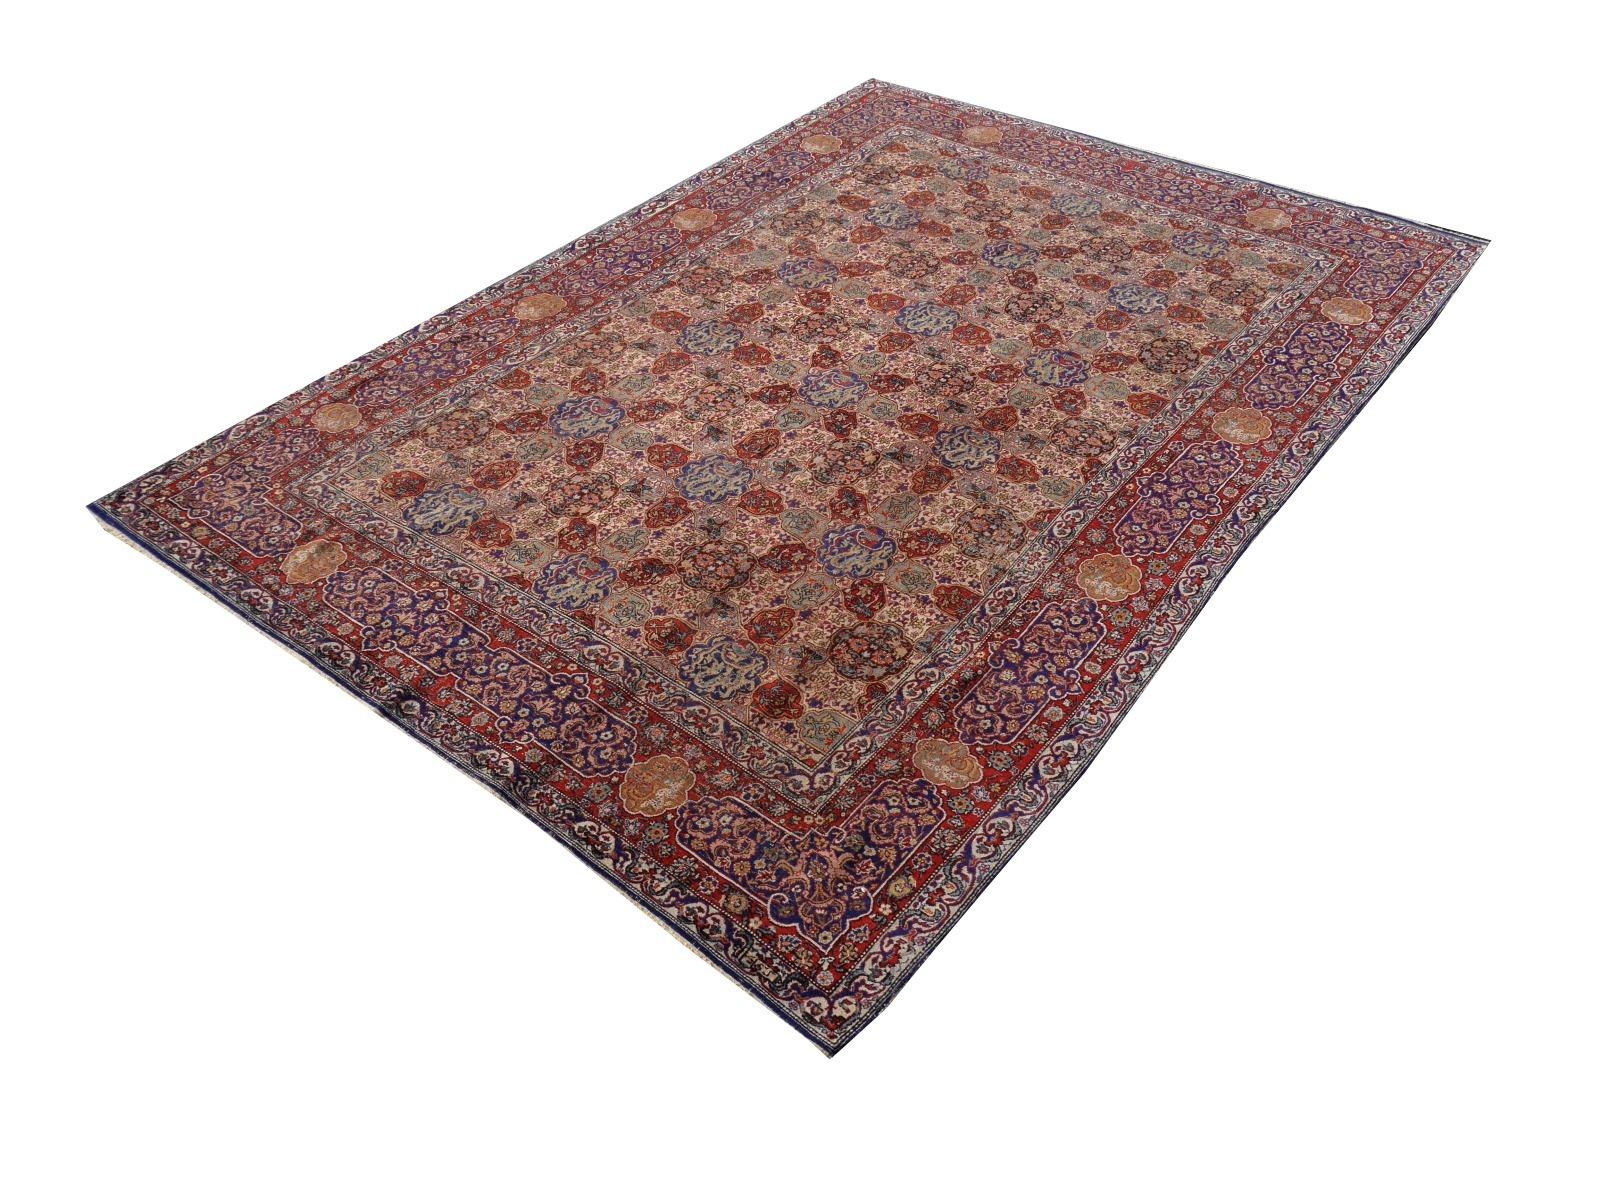 This beautiful rug comes from western Turkey. 
The rug originates in the town of Hereke - also known for its fine silk rugs.
It is of wonderful quality with a fine luster and vibrant colors. The condition is good with visible wear in the field of